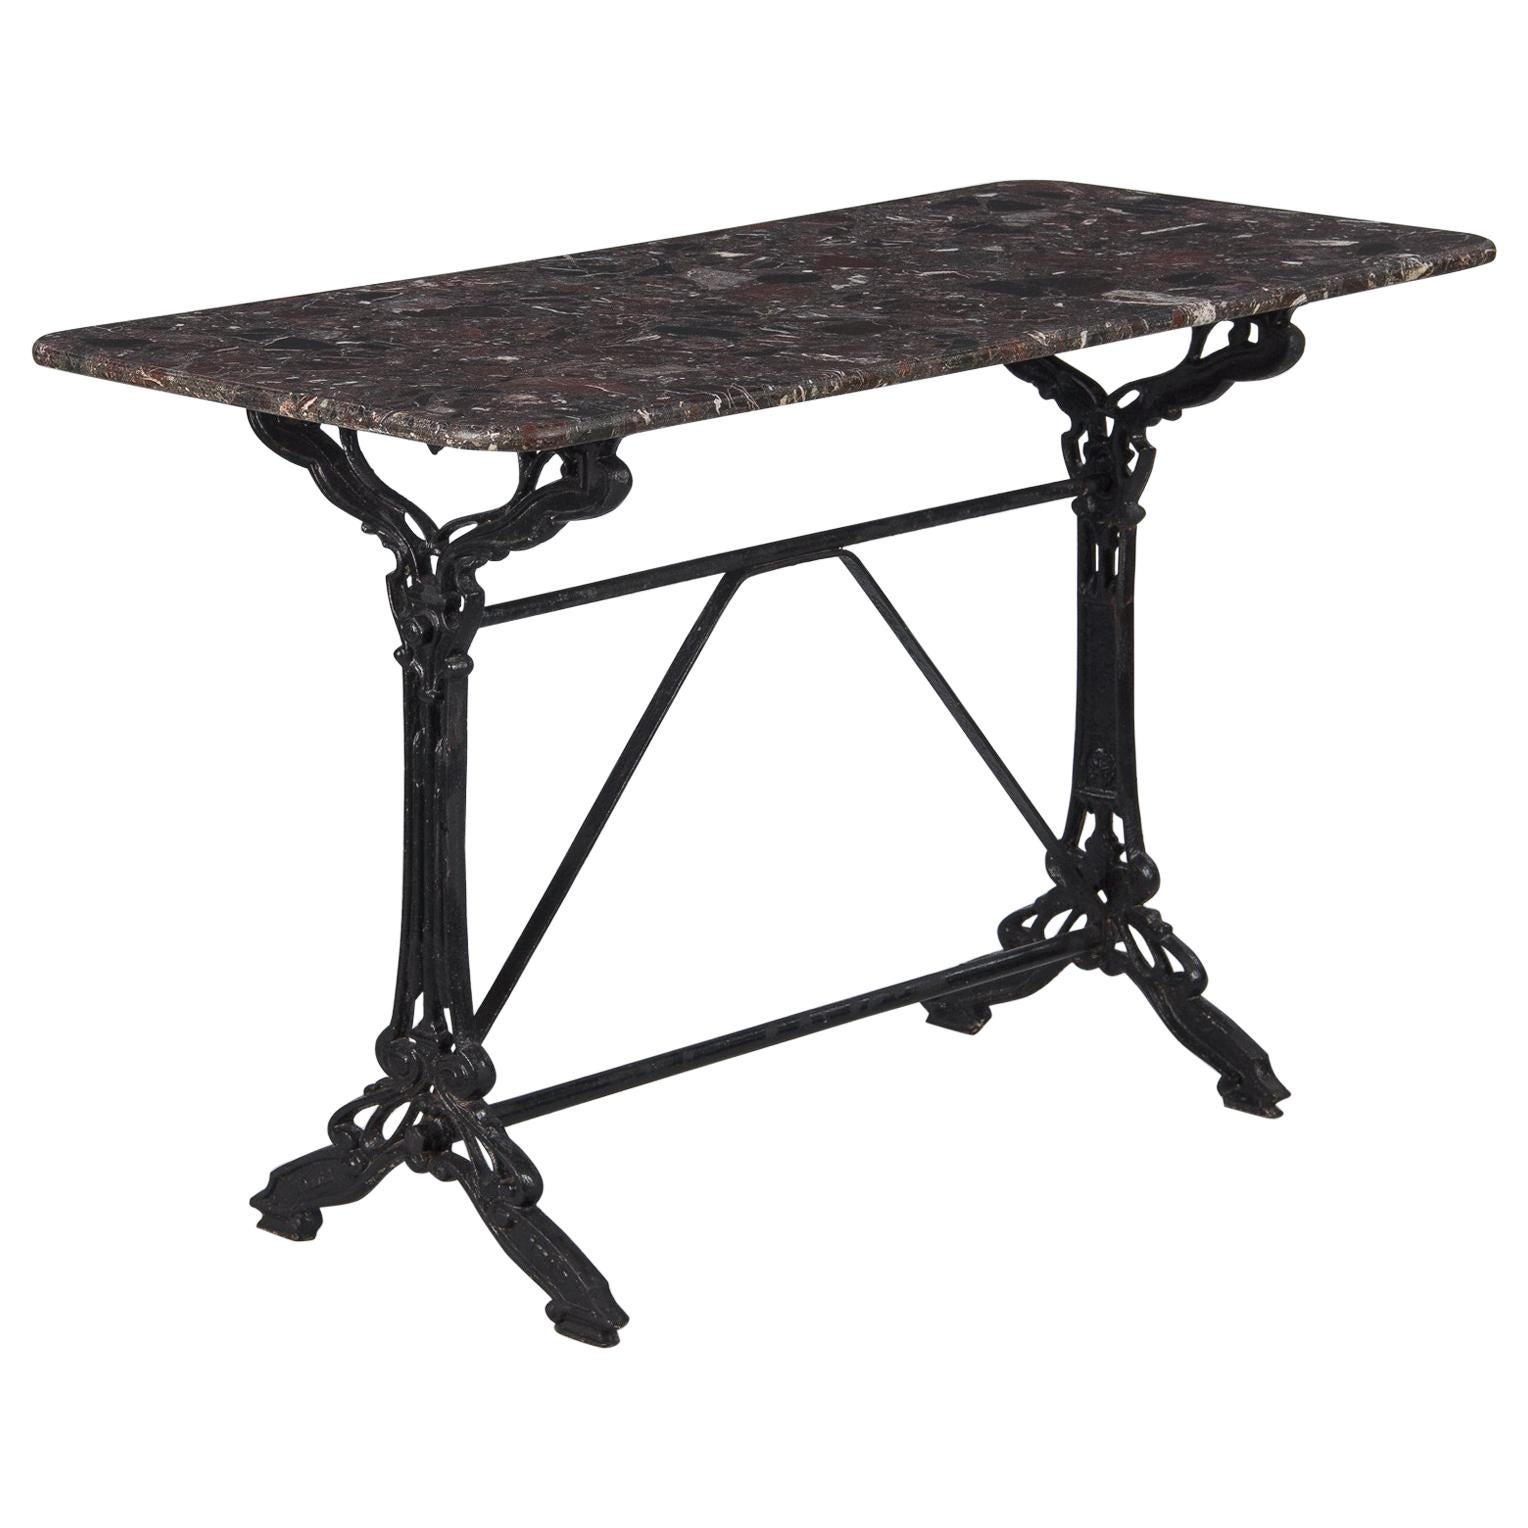 French Art Nouveau Iron and Marble Bistro Table, 1900s